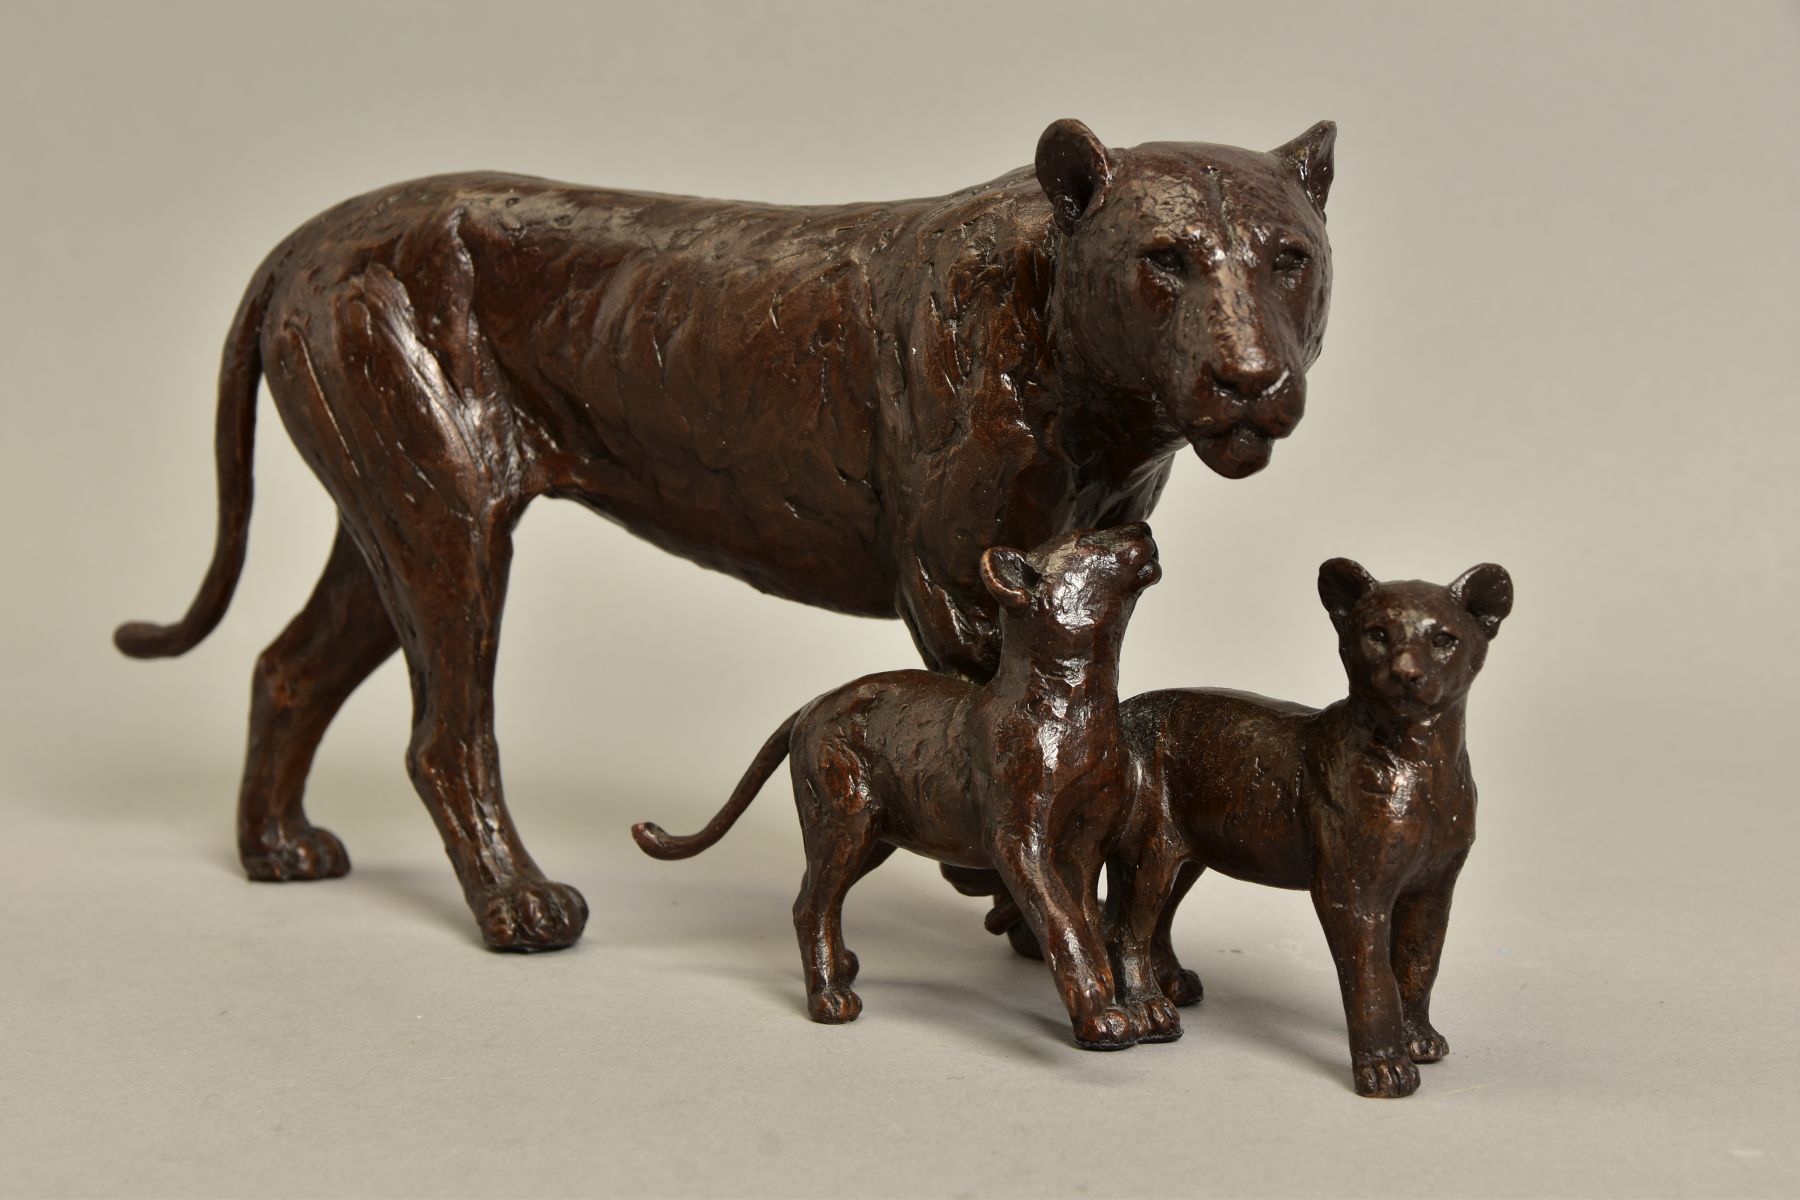 MICHAEL SIMPSON (BRITISH CONTEMPORARY) 'CUB SCOUTS', a limited edition bronze sculpture of a lioness - Image 5 of 6